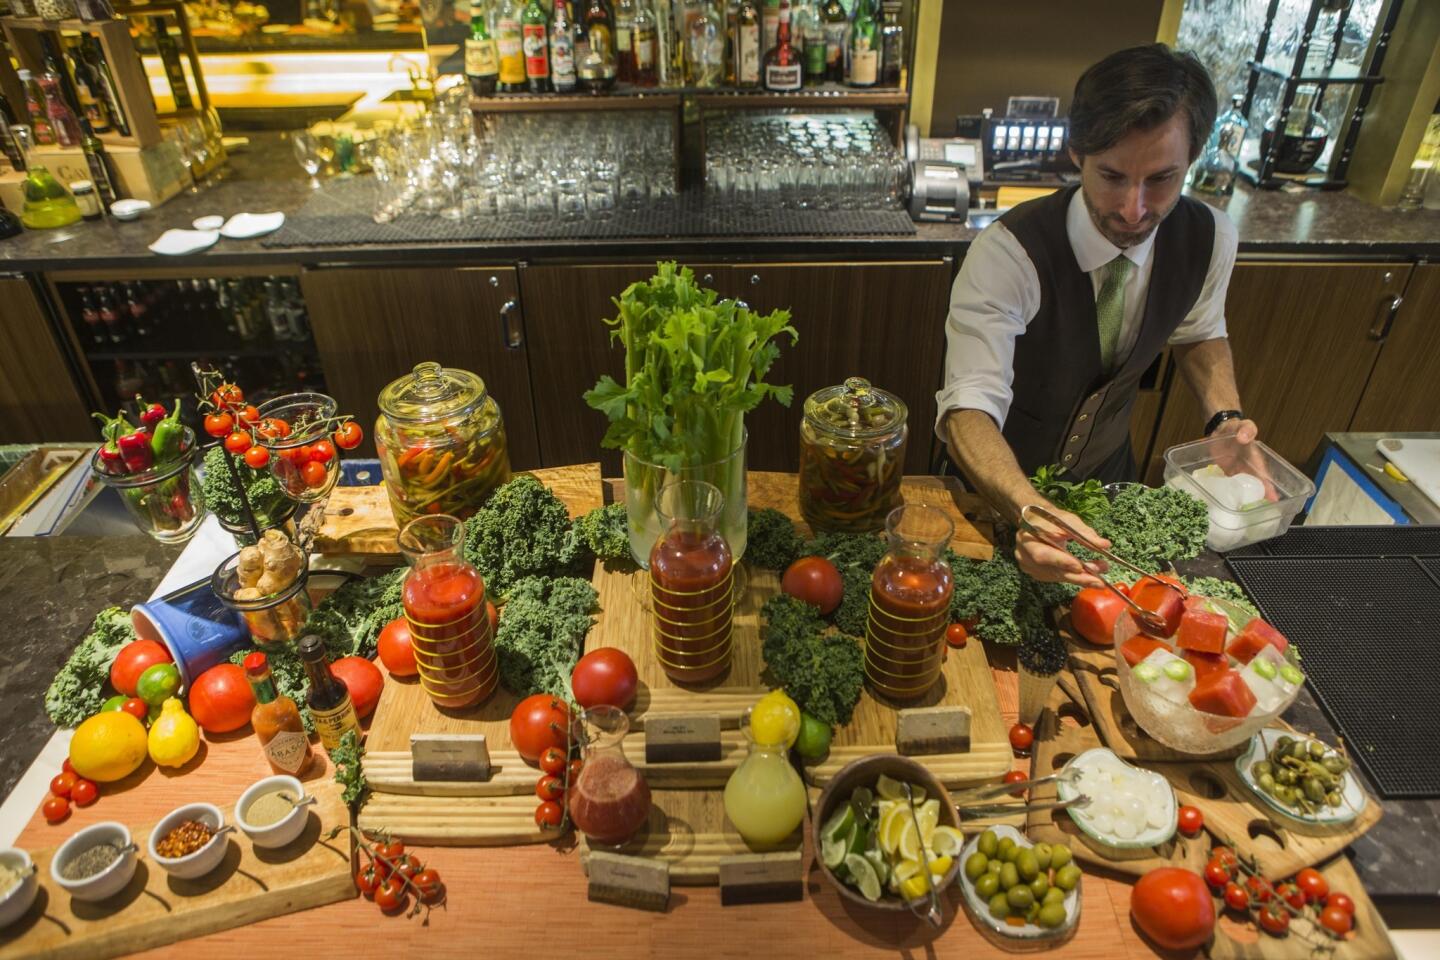 Bartender Ryan Burney places ice cubes at the Four Seasons hotel's Sunday brunch Bloody Mary bar.